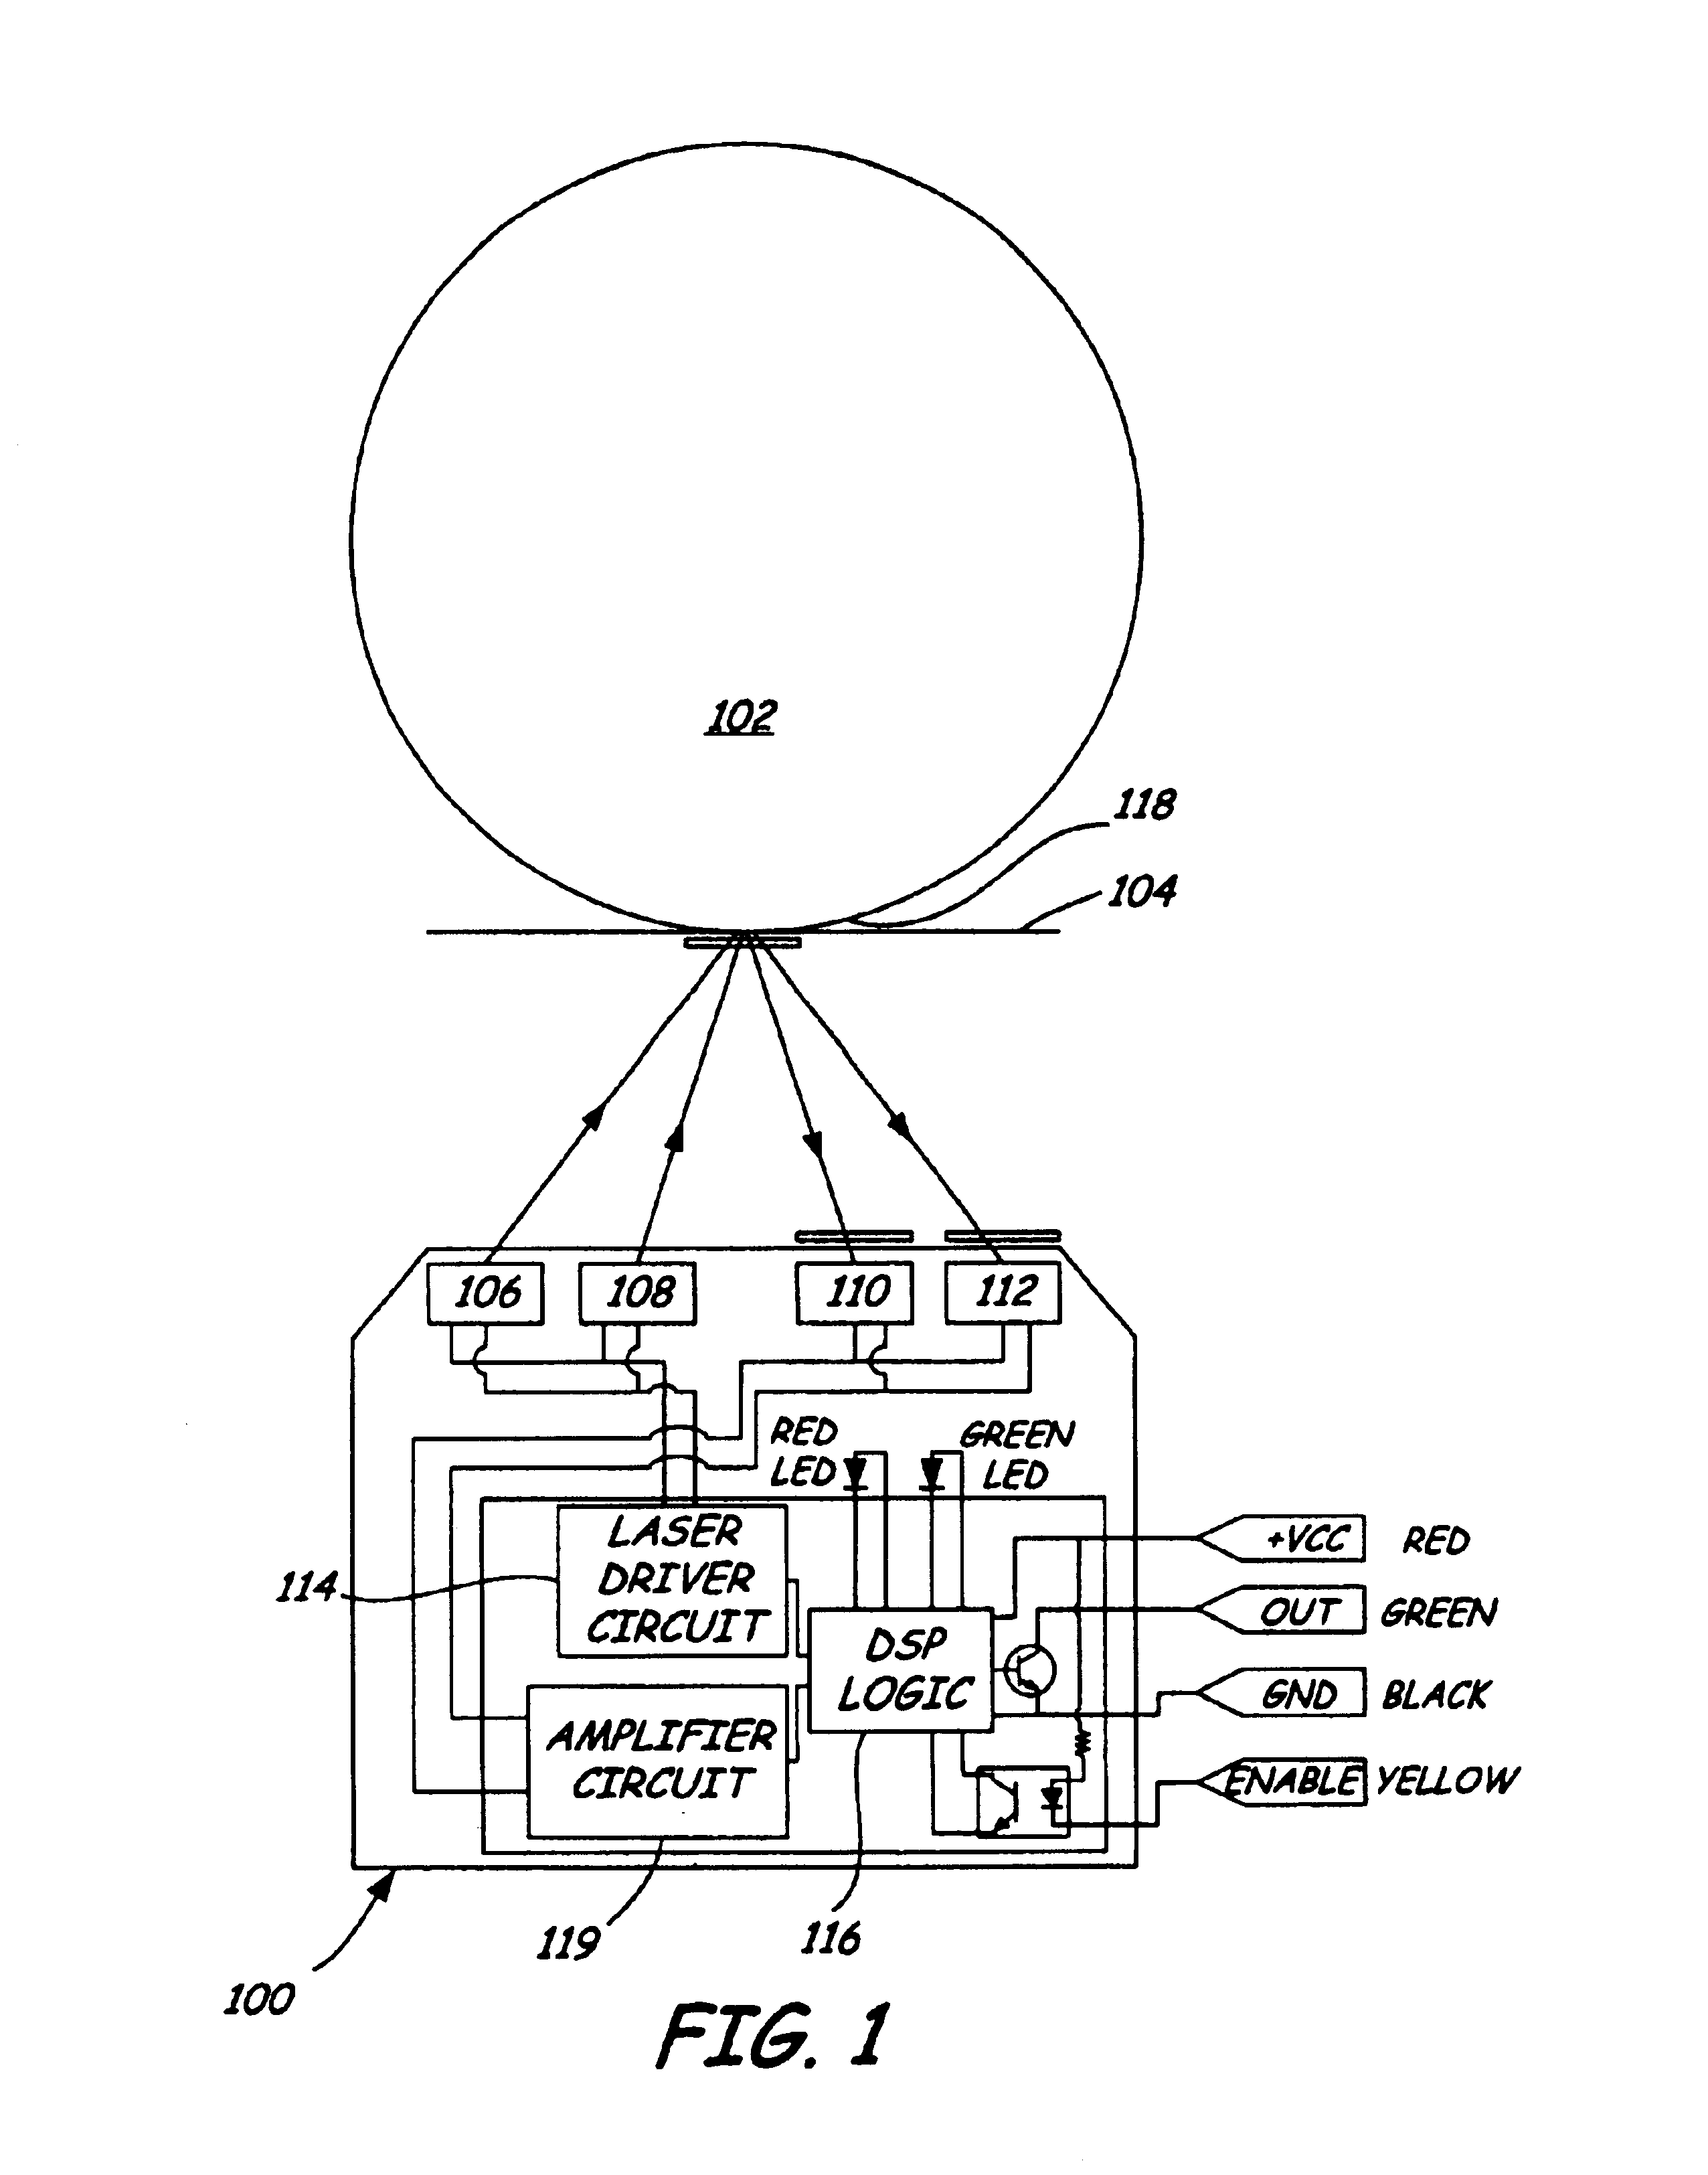 Semiconductor wafer carrier mapping sensor